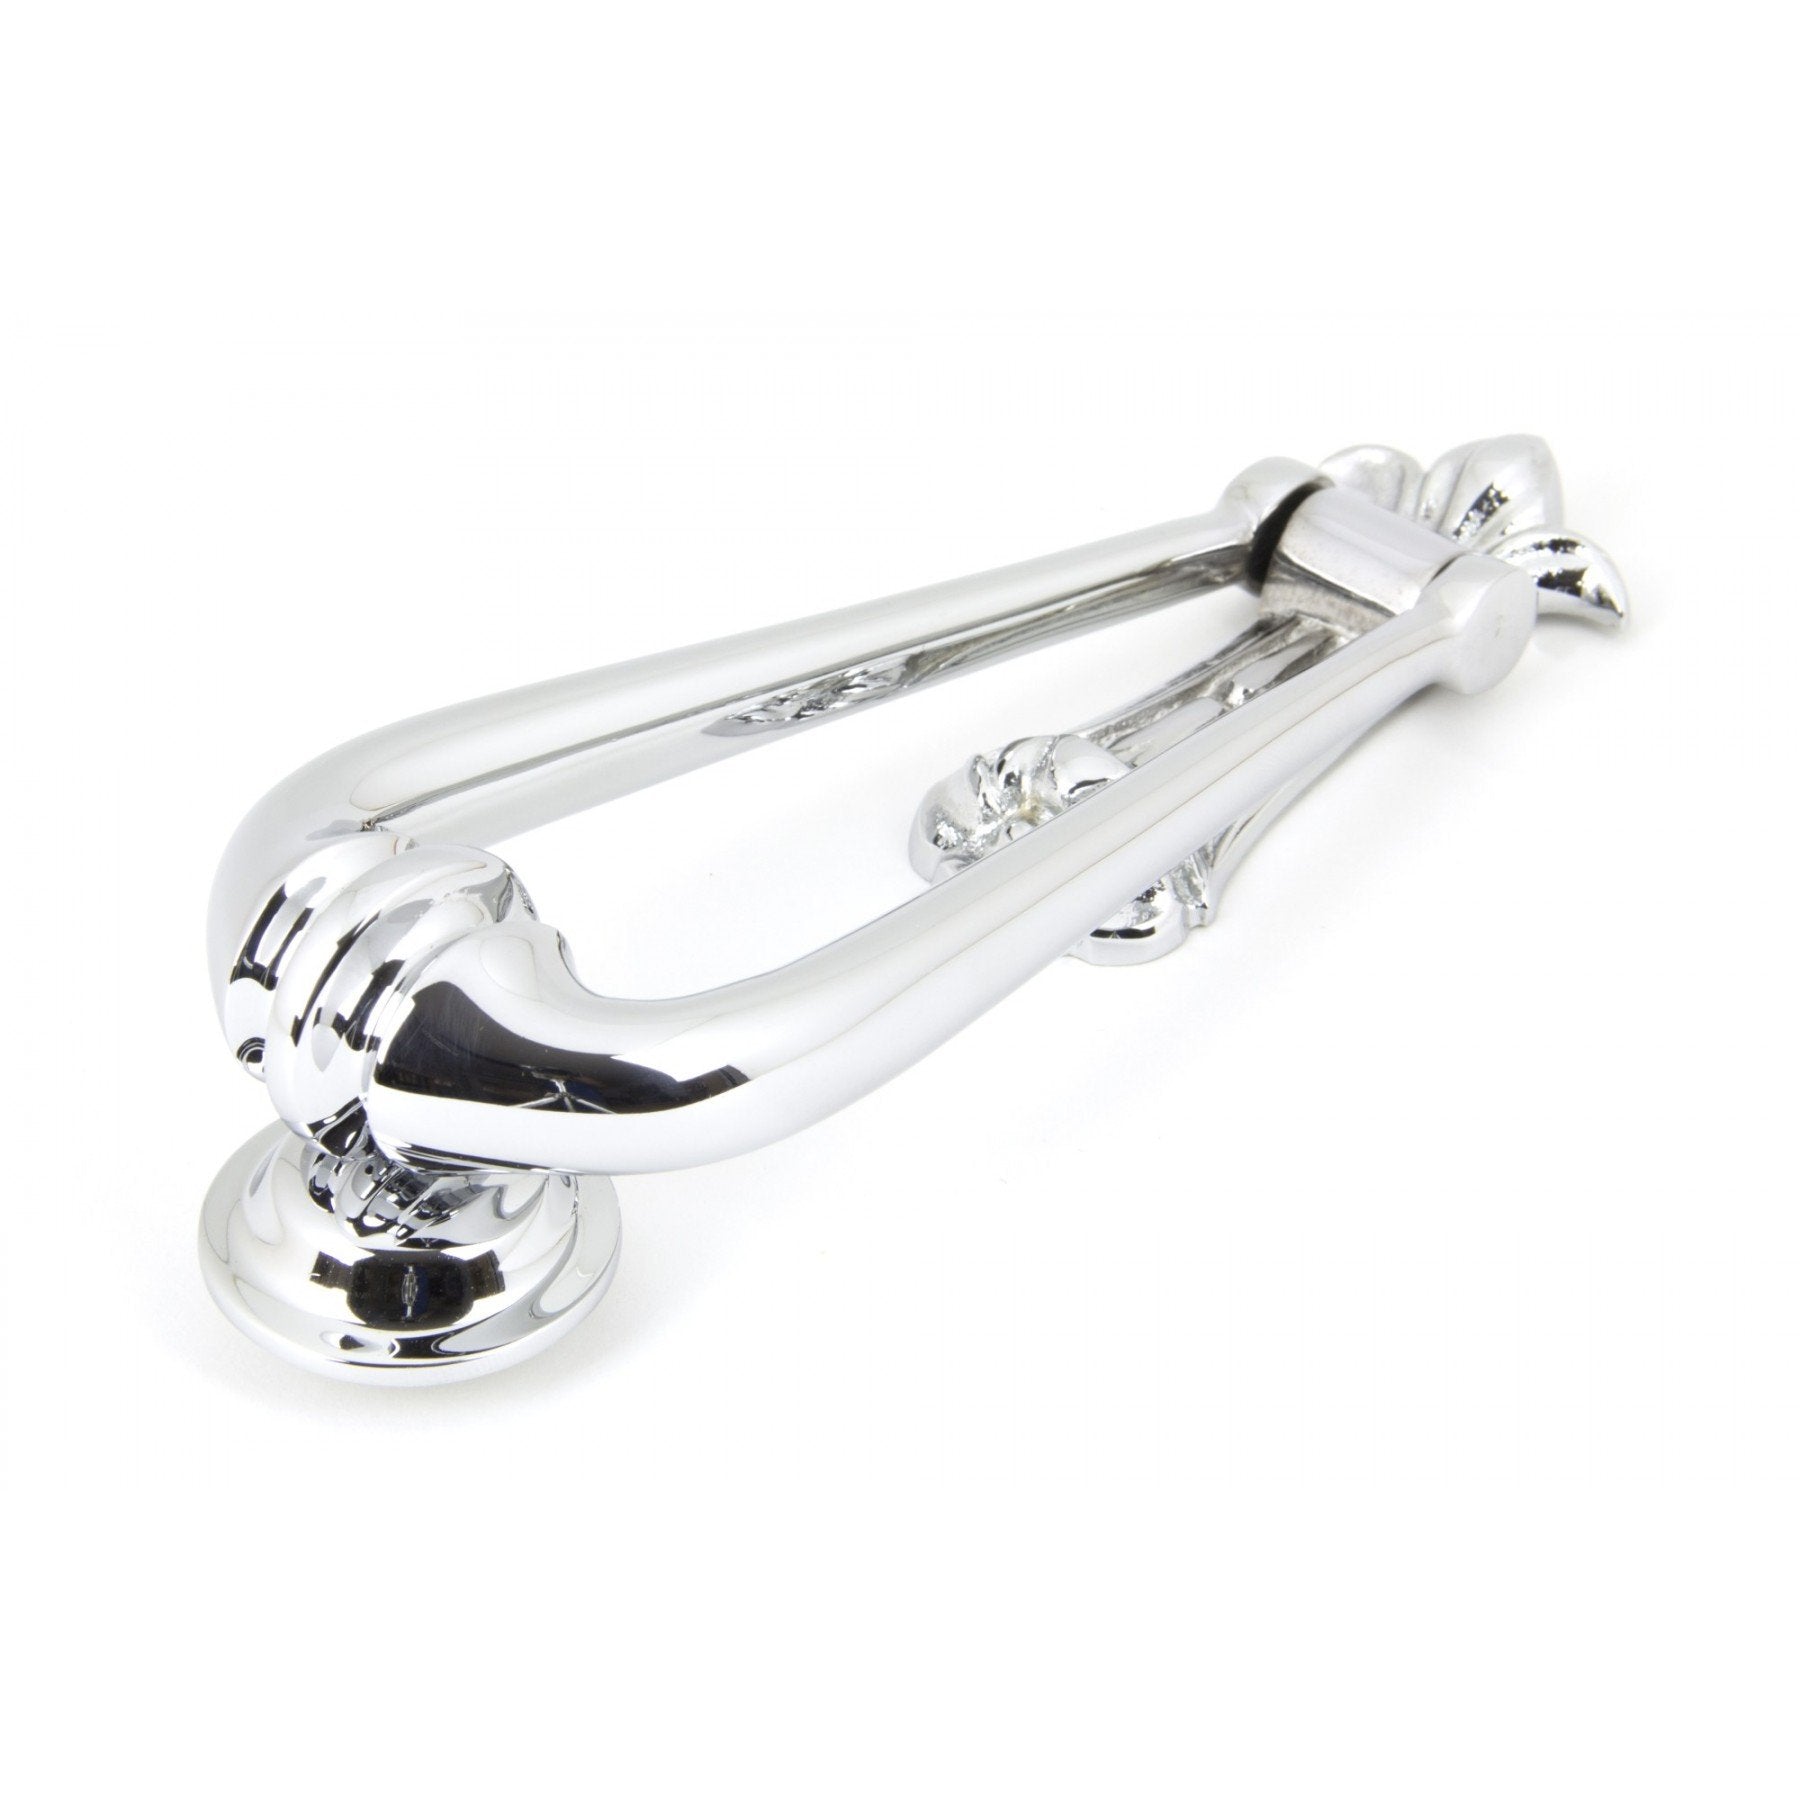 From the Anvil Polished Chrome Loop Door Knocker